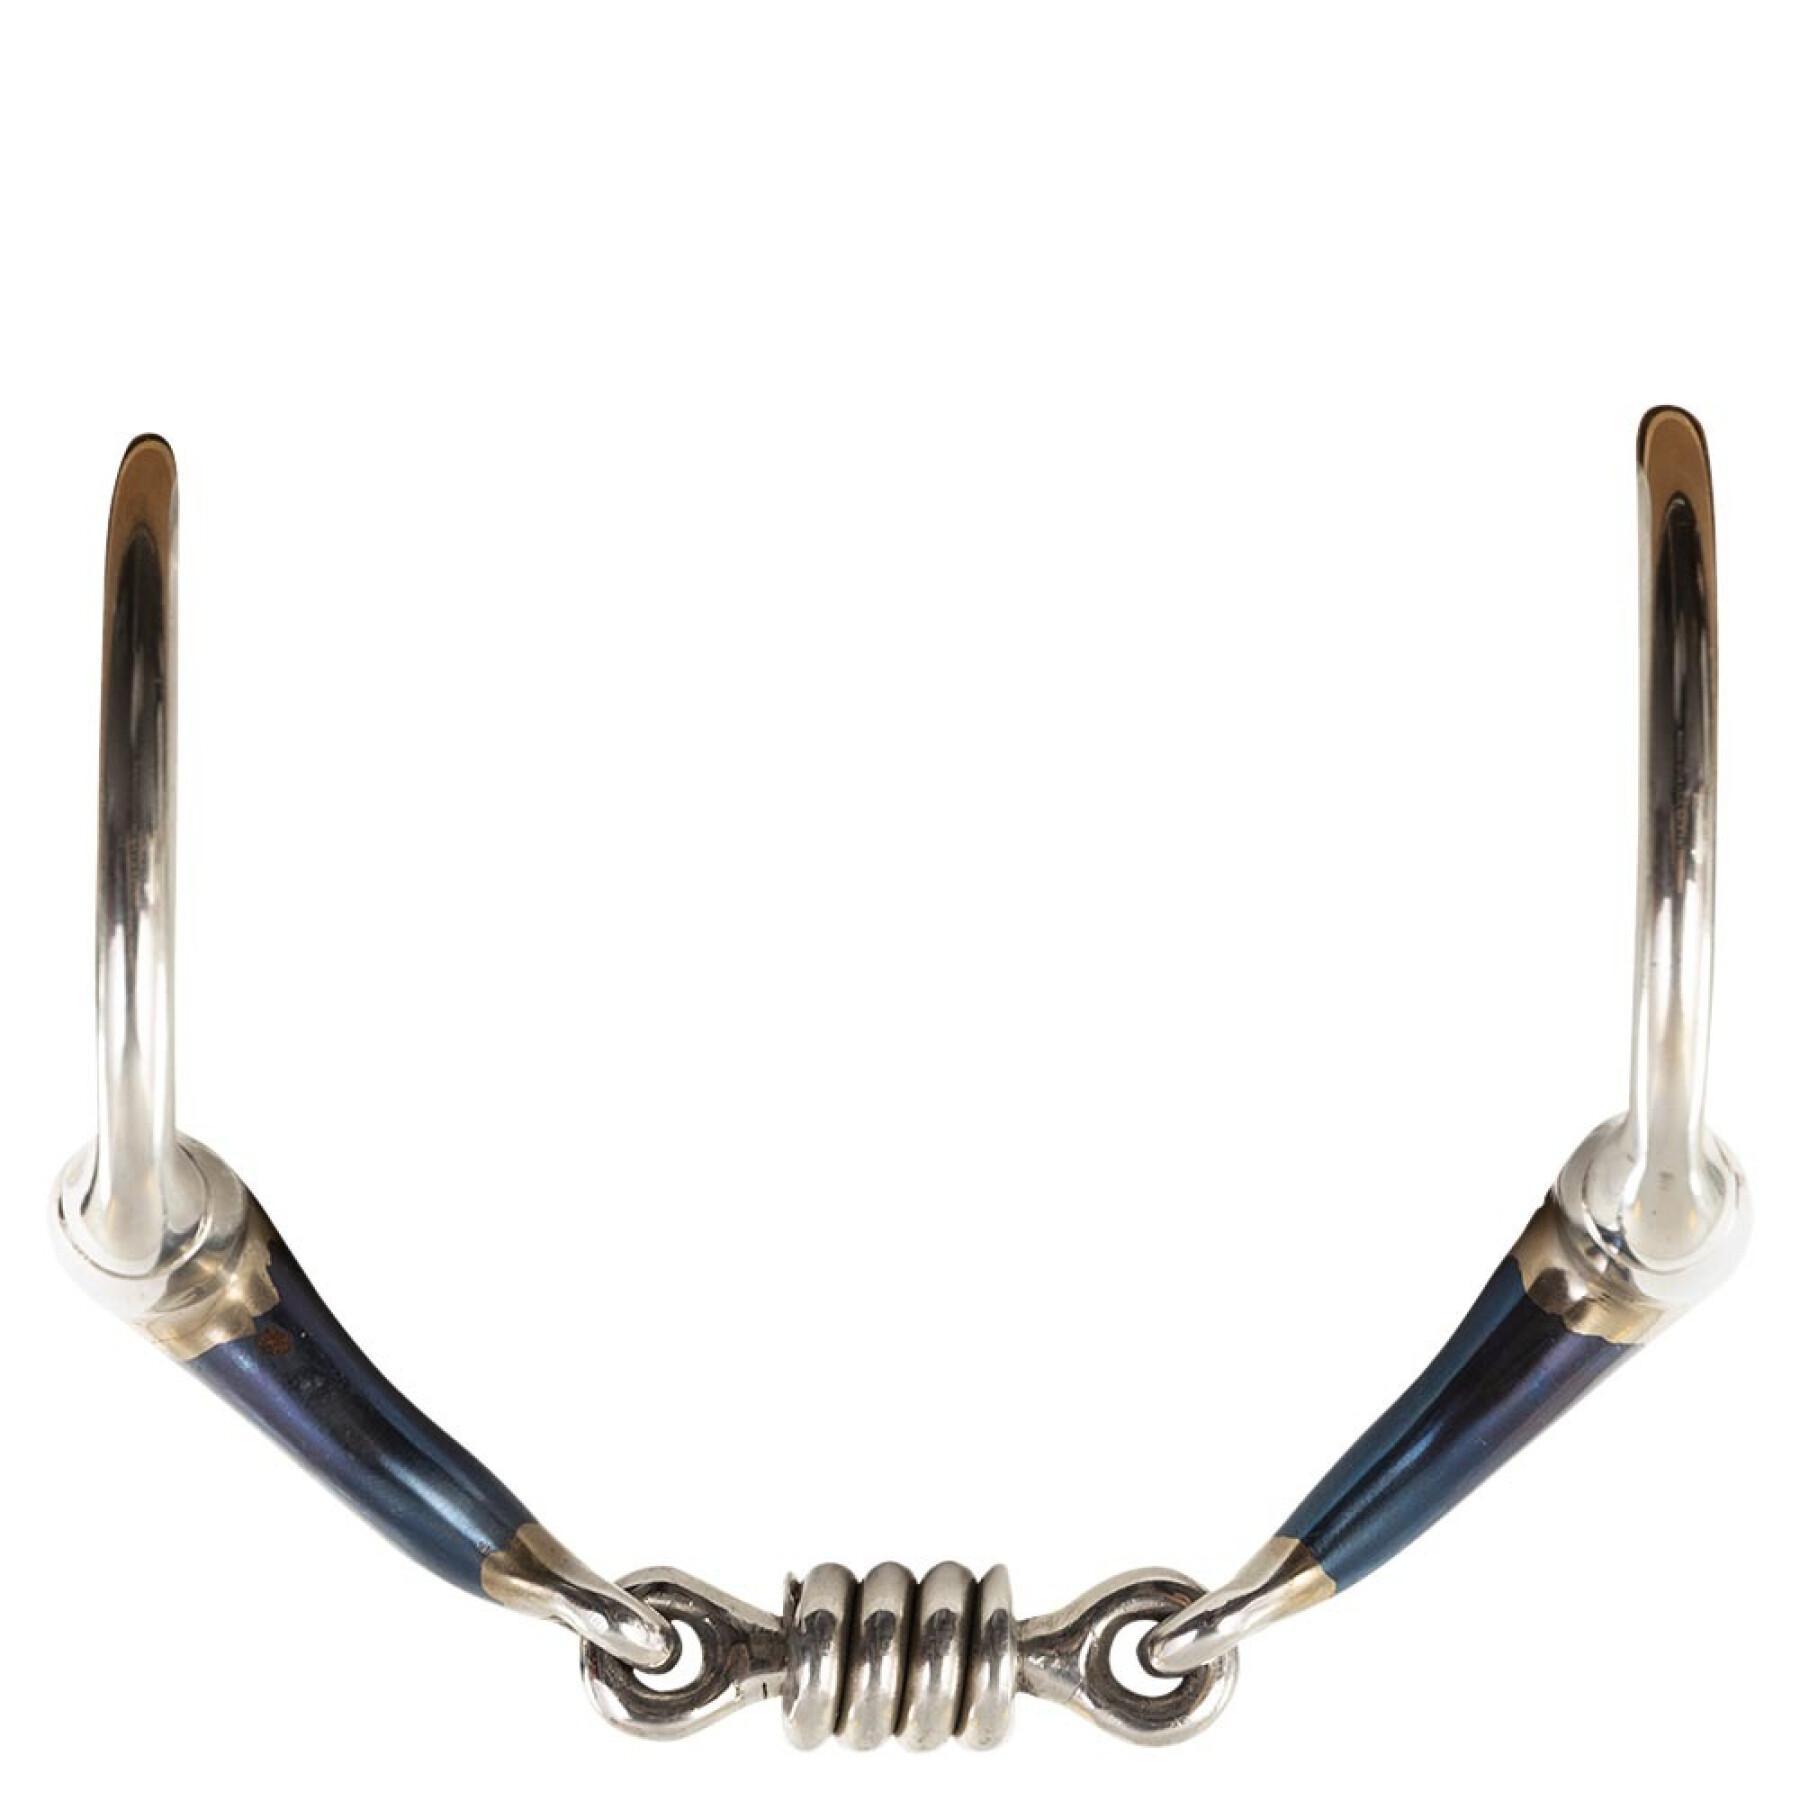 Double snaffle bits for horses BR Equitation Chantilly